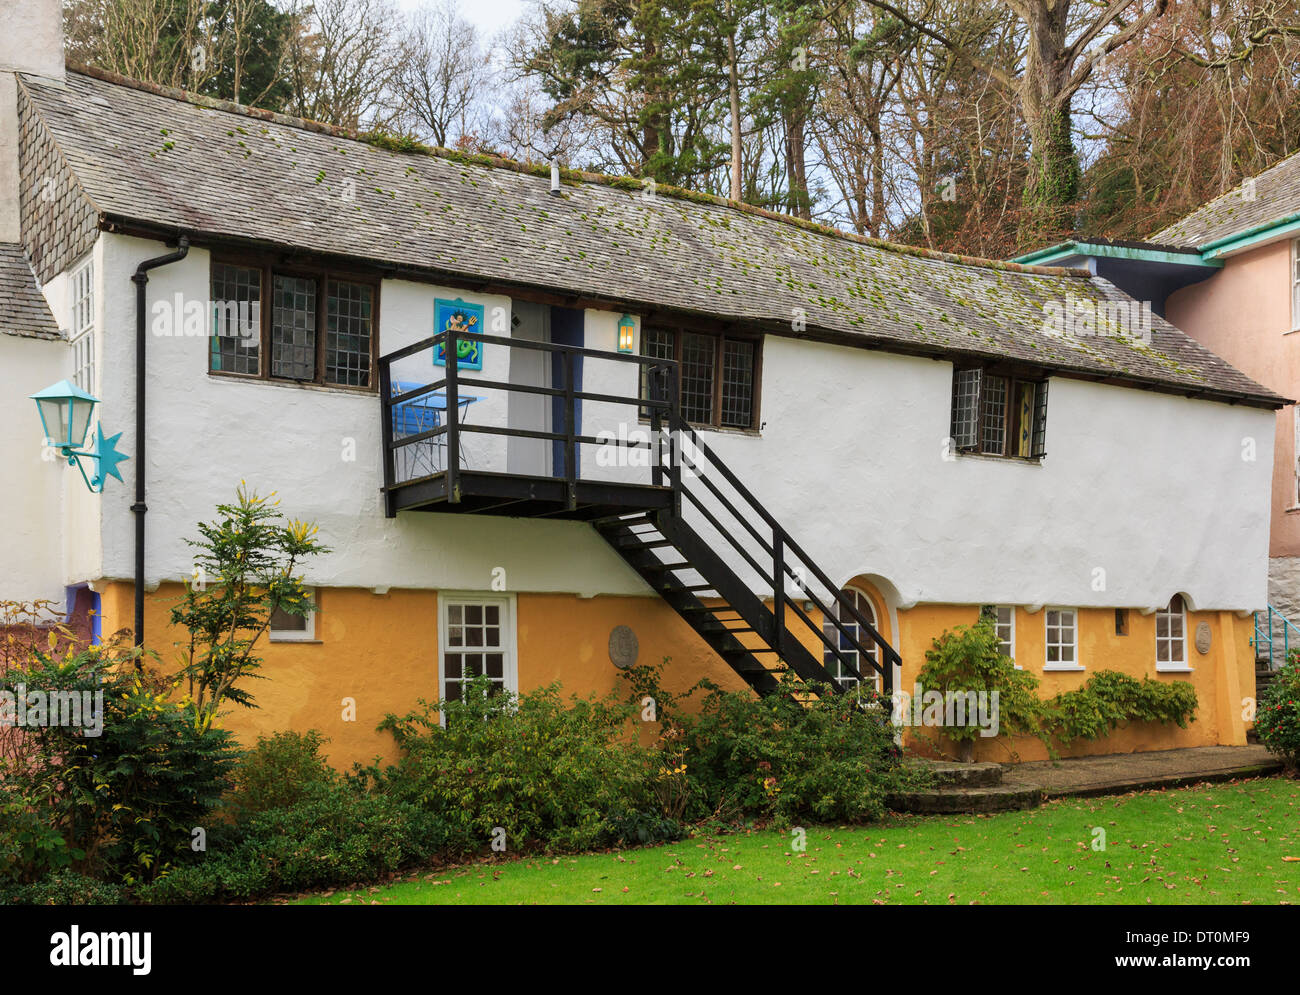 Old cottage in the Italian style holiday village of Portmeirion, Gwynedd, North Wales, UK, Britain Stock Photo